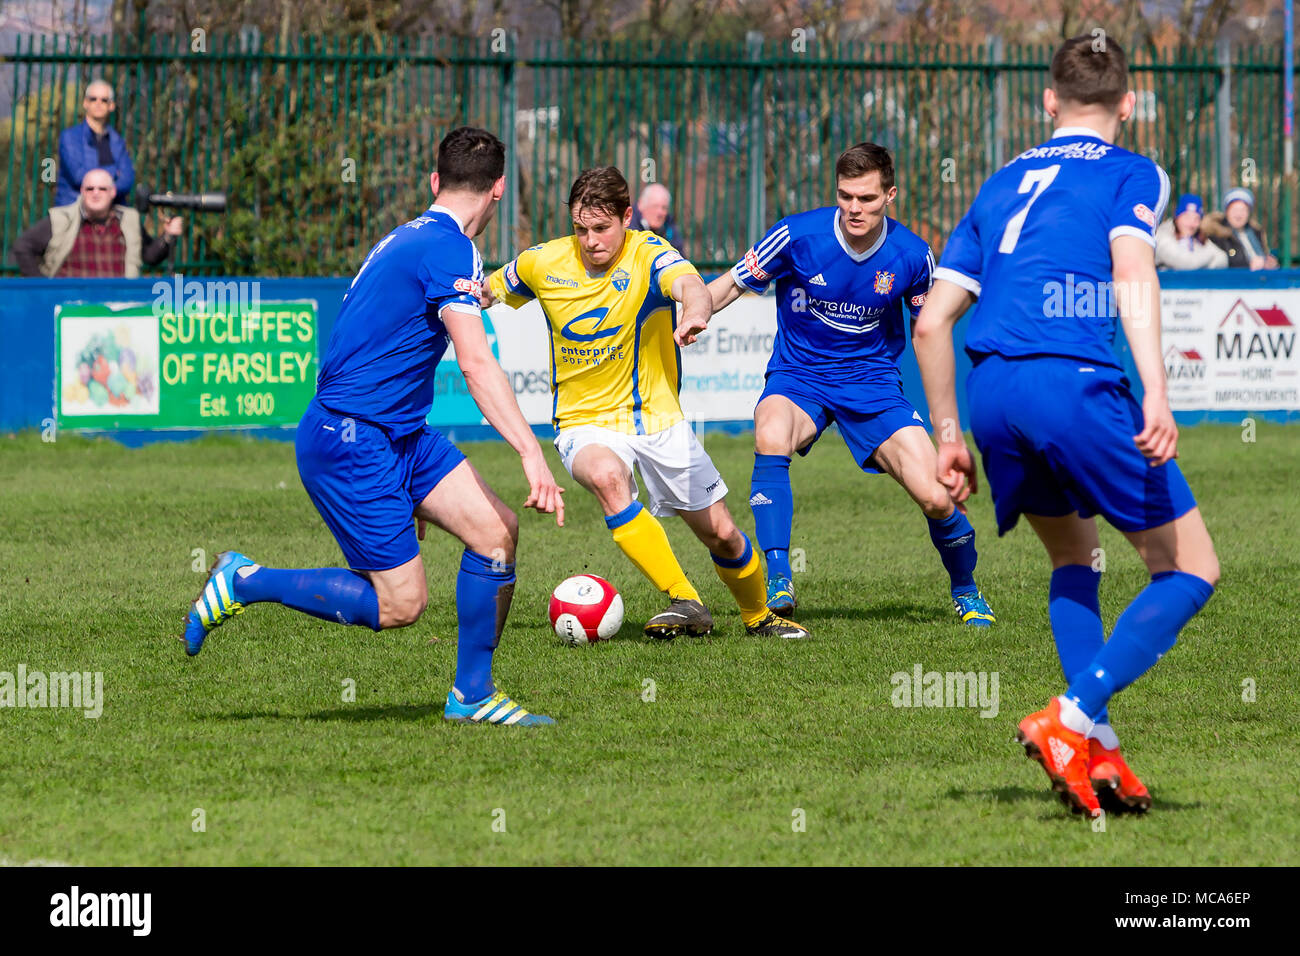 Farsley, UK, 14 April 2018. Warrington Town's Ged Kinsella runs with the ball against Farsley Celtic during Warrington's 2-0 win on Saturday 14 April 2018 in the top of the table clash near the end of the season Credit: John Hopkins/Alamy Live News Credit: John Hopkins/Alamy Live News Stock Photo